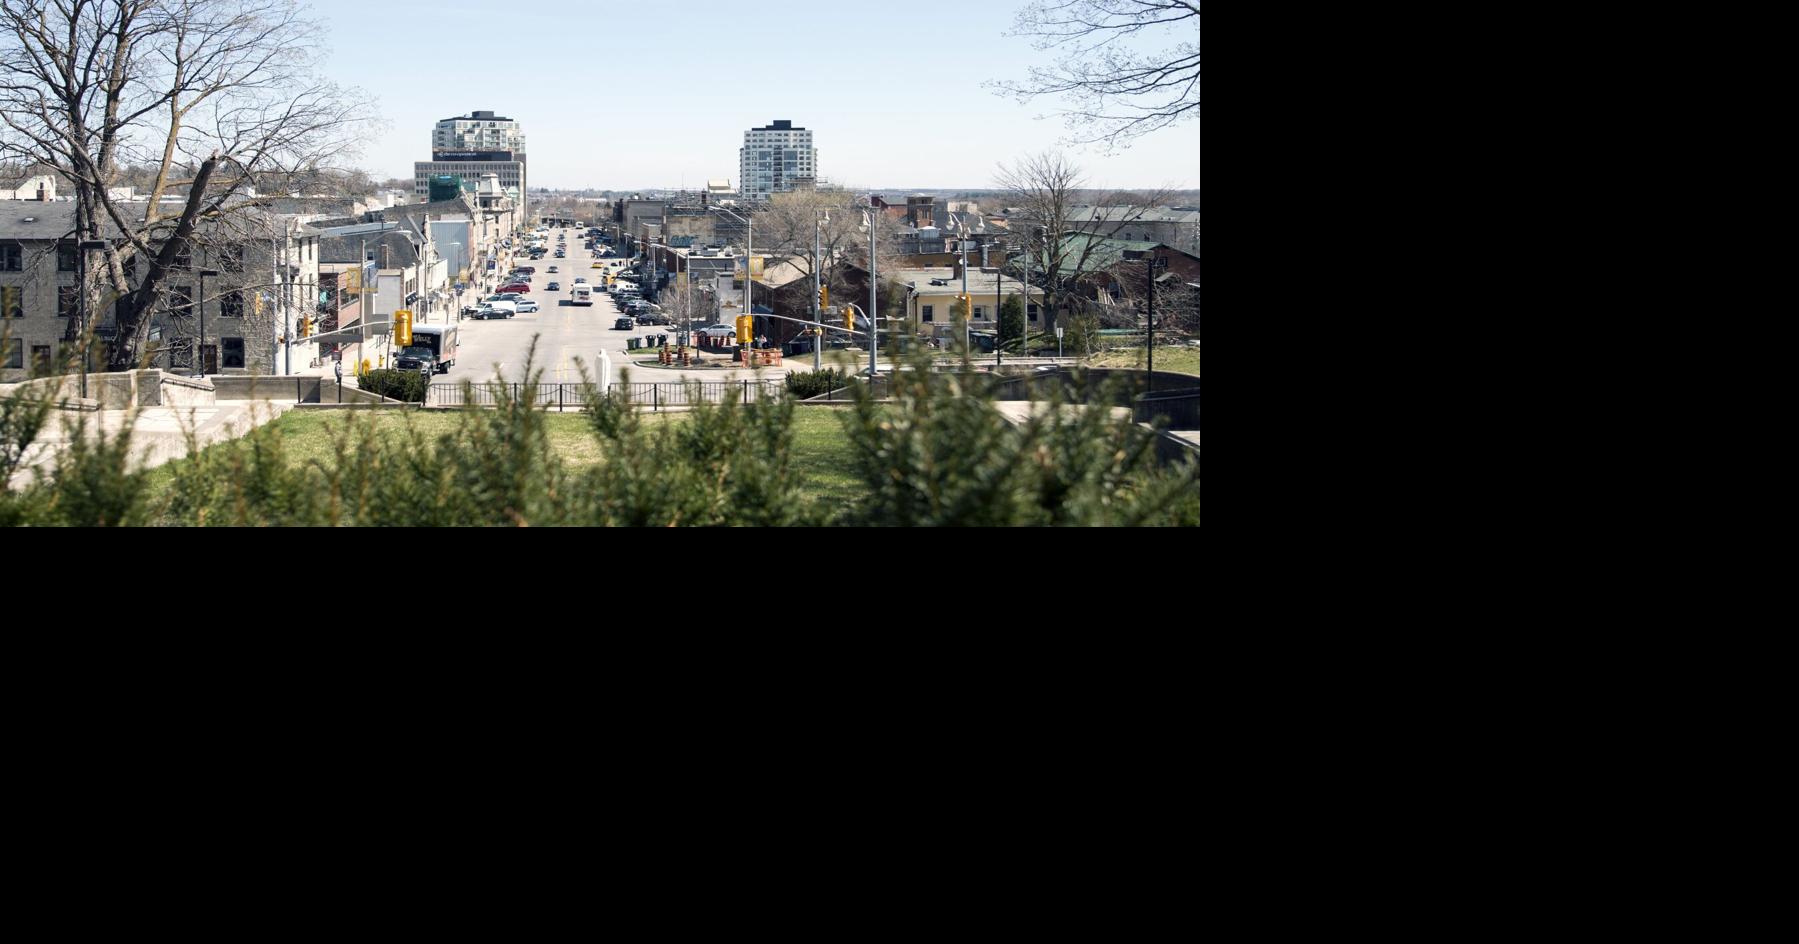 LoveLocal: A look at a future downtown Guelph